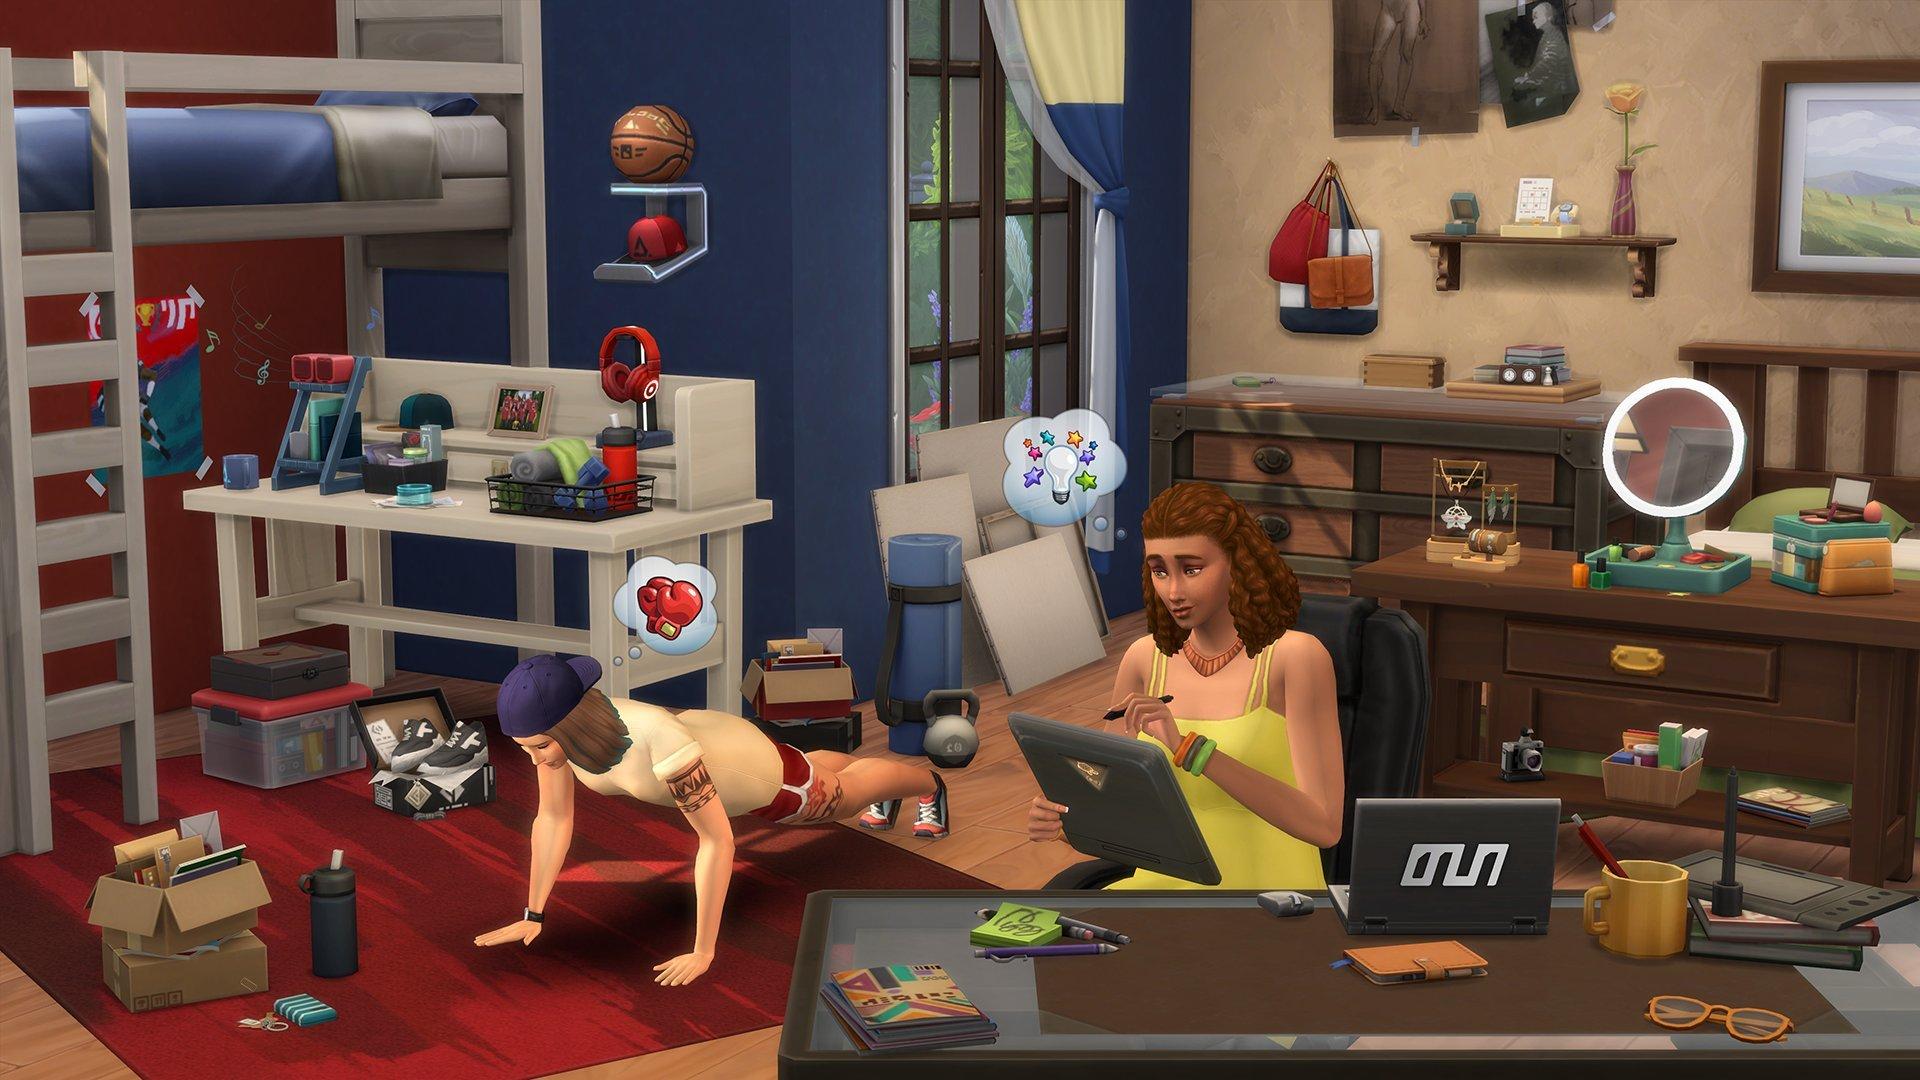 The Sims 4 new kits will add clutter or coziness to Sims' homes